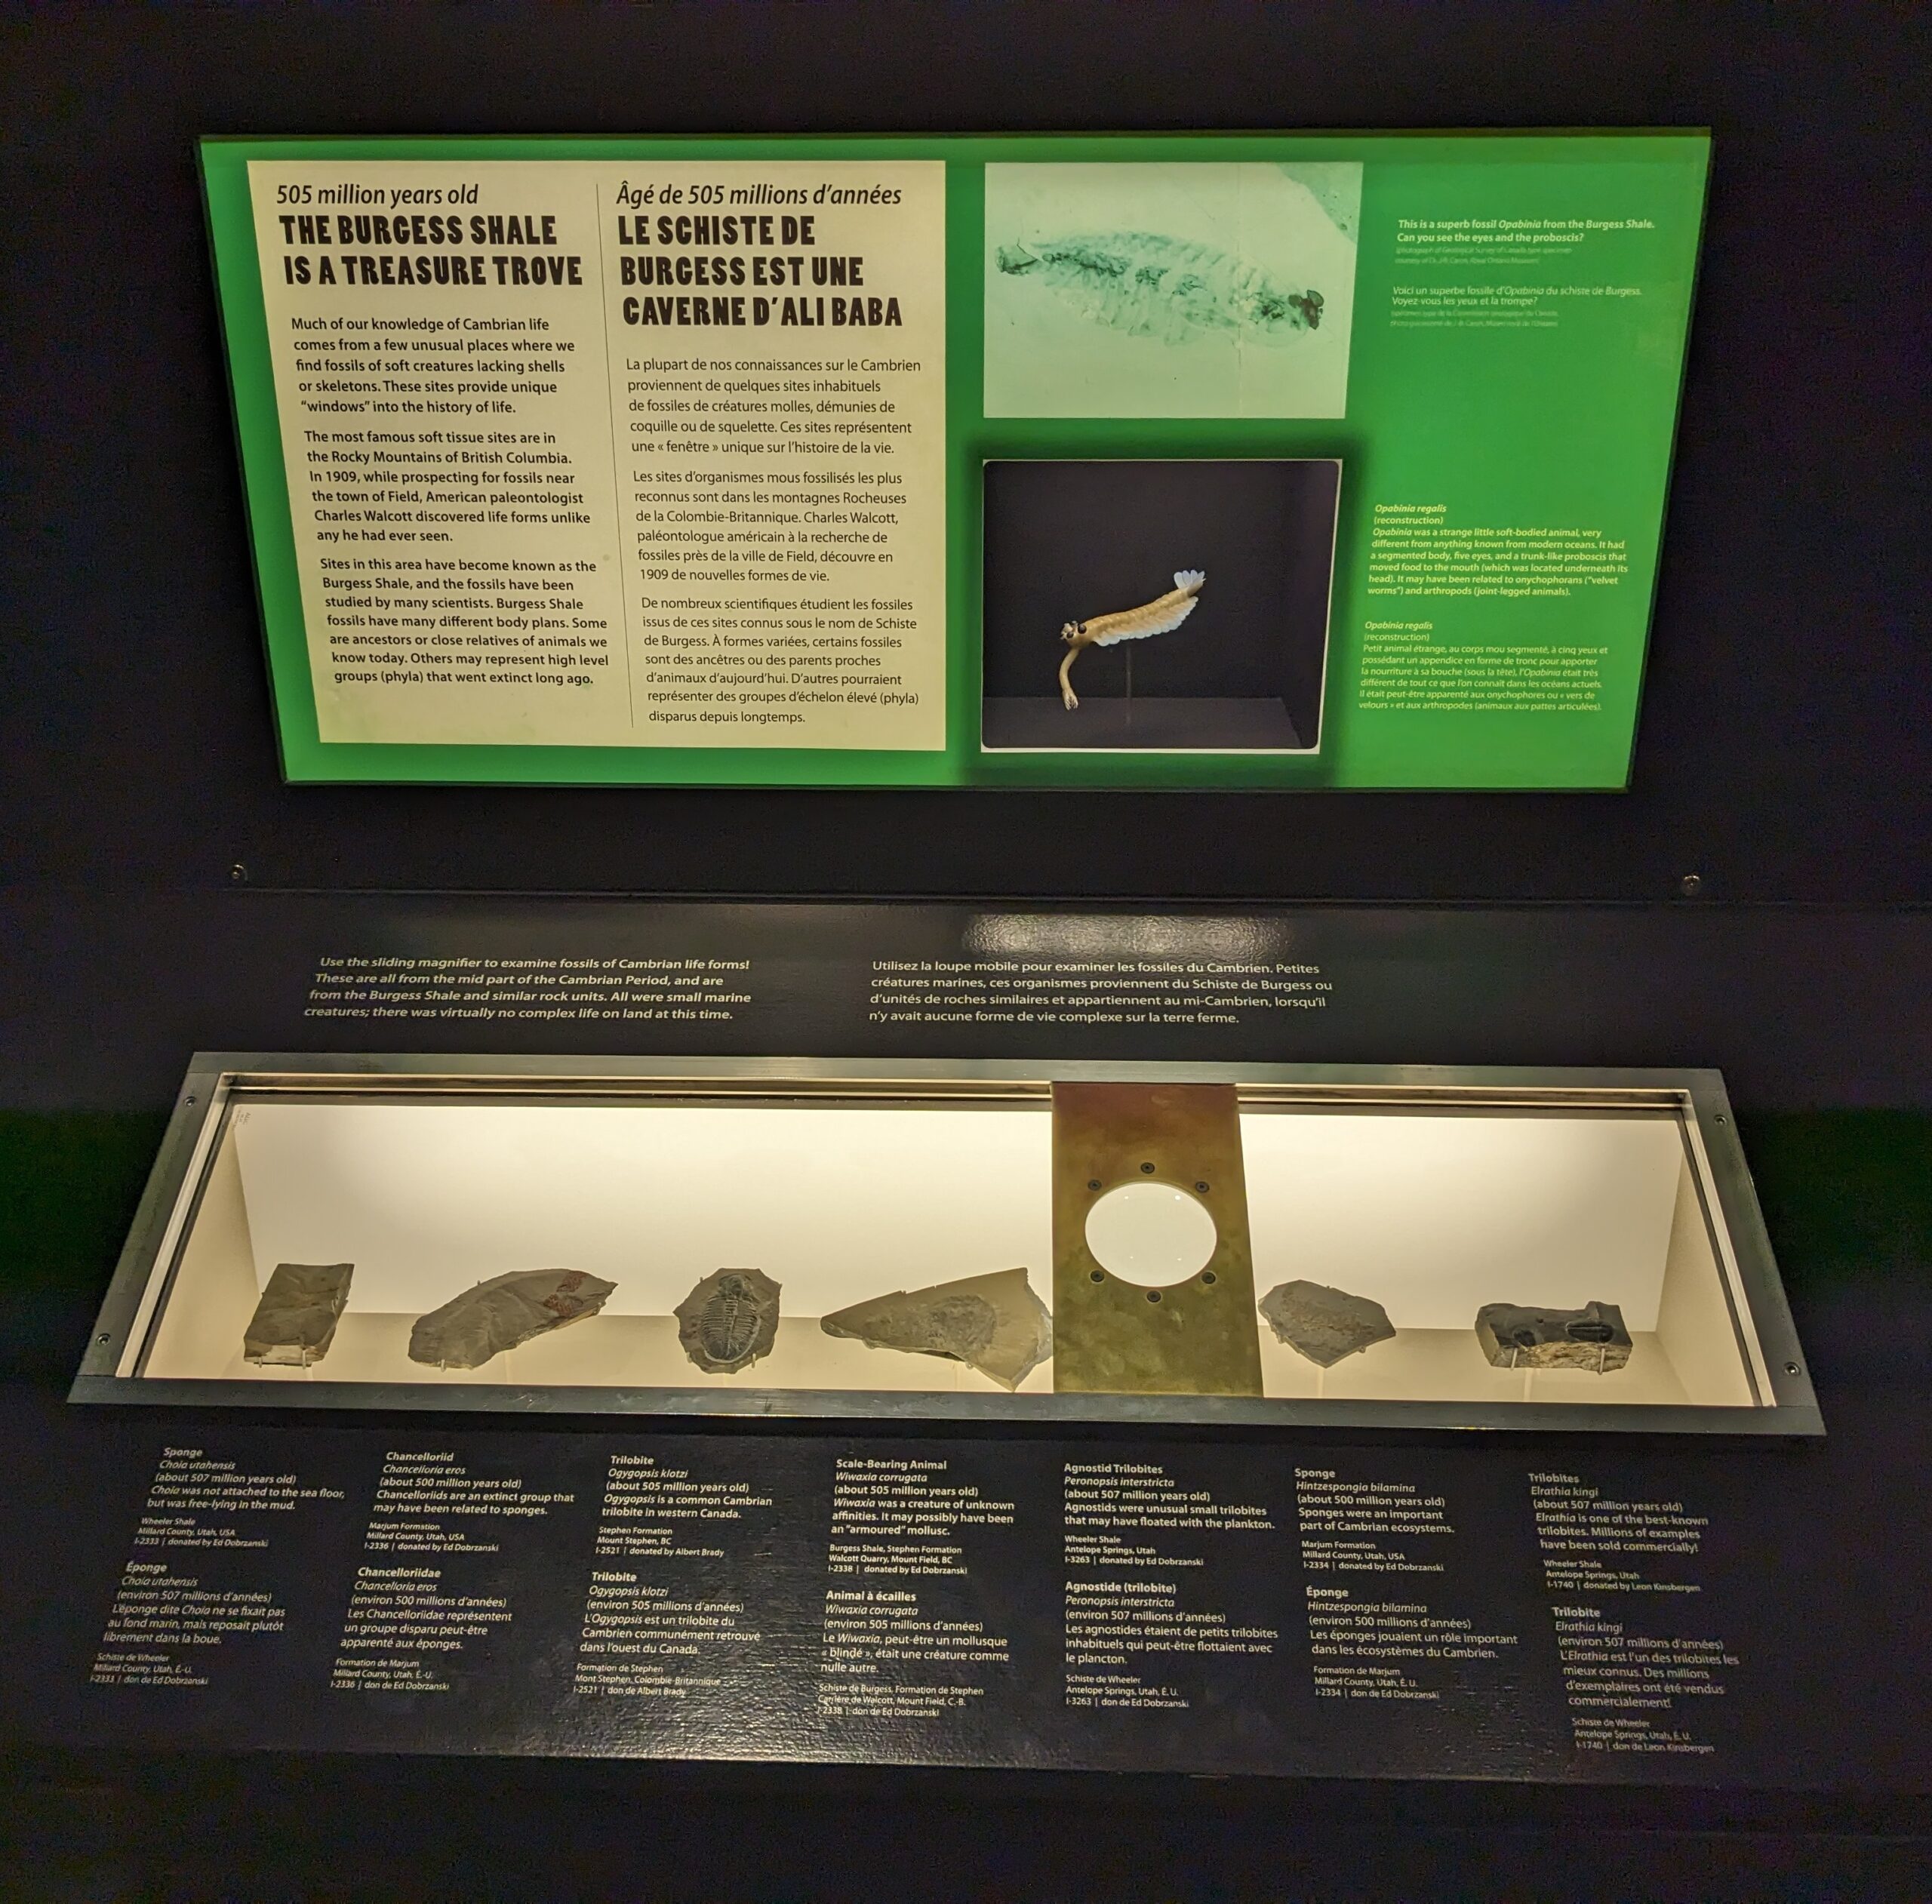 A display case showcasing fossils from the Burgess Shale. Several specimens are mounted in a line, with a sliding magnifier for viewing.